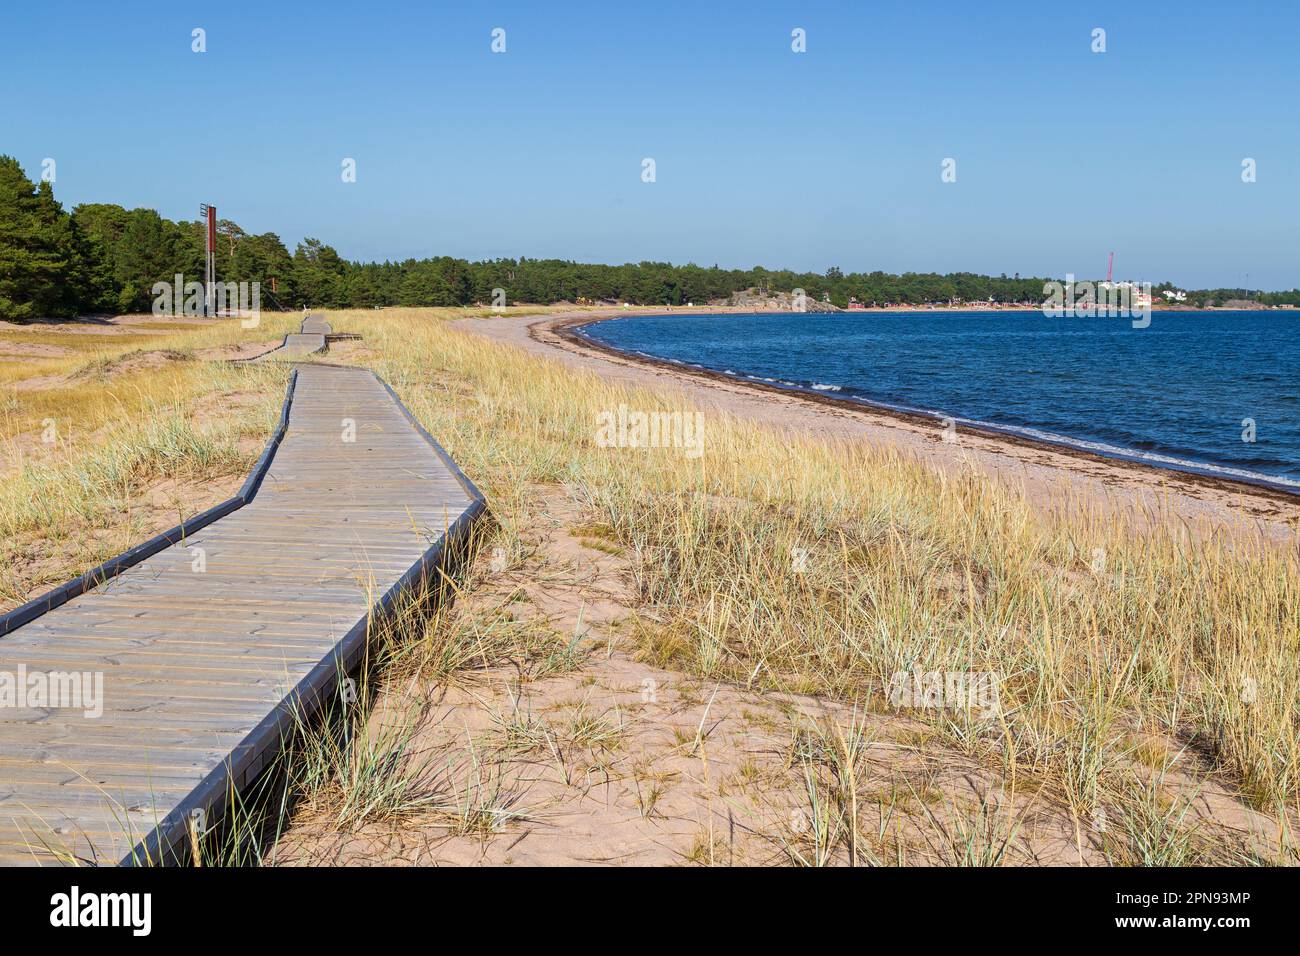 Wooden boardwalk at the Tulliniemi beach in Hanko, Finland, on a sunny day in the summer. Stock Photo